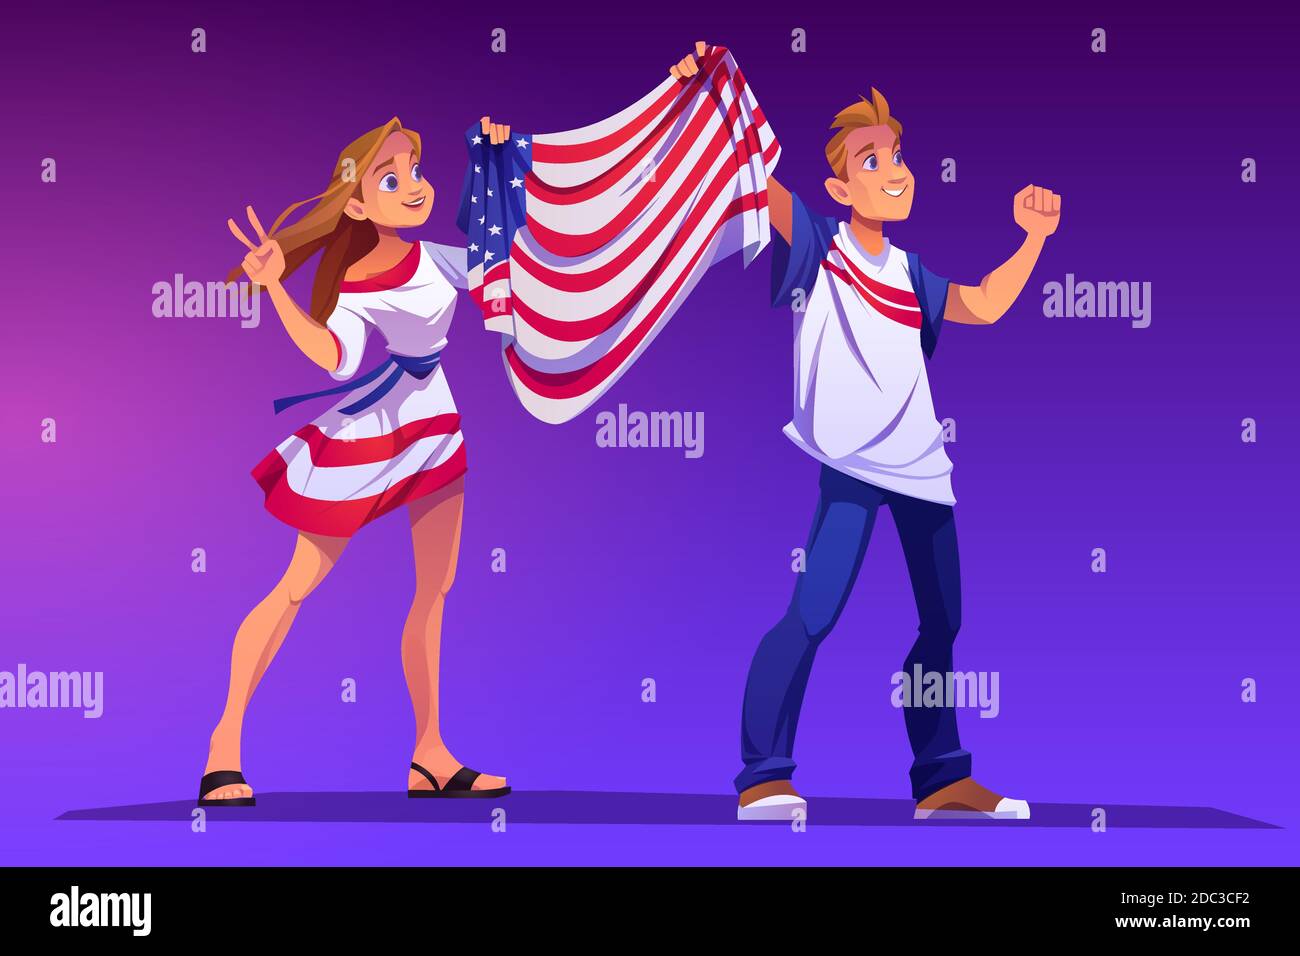 People holding USA flag at demonstration, political rally or national celebration. Vector cartoon illustration of man and woman with flag of United States of America. American patriotic activists Stock Vector